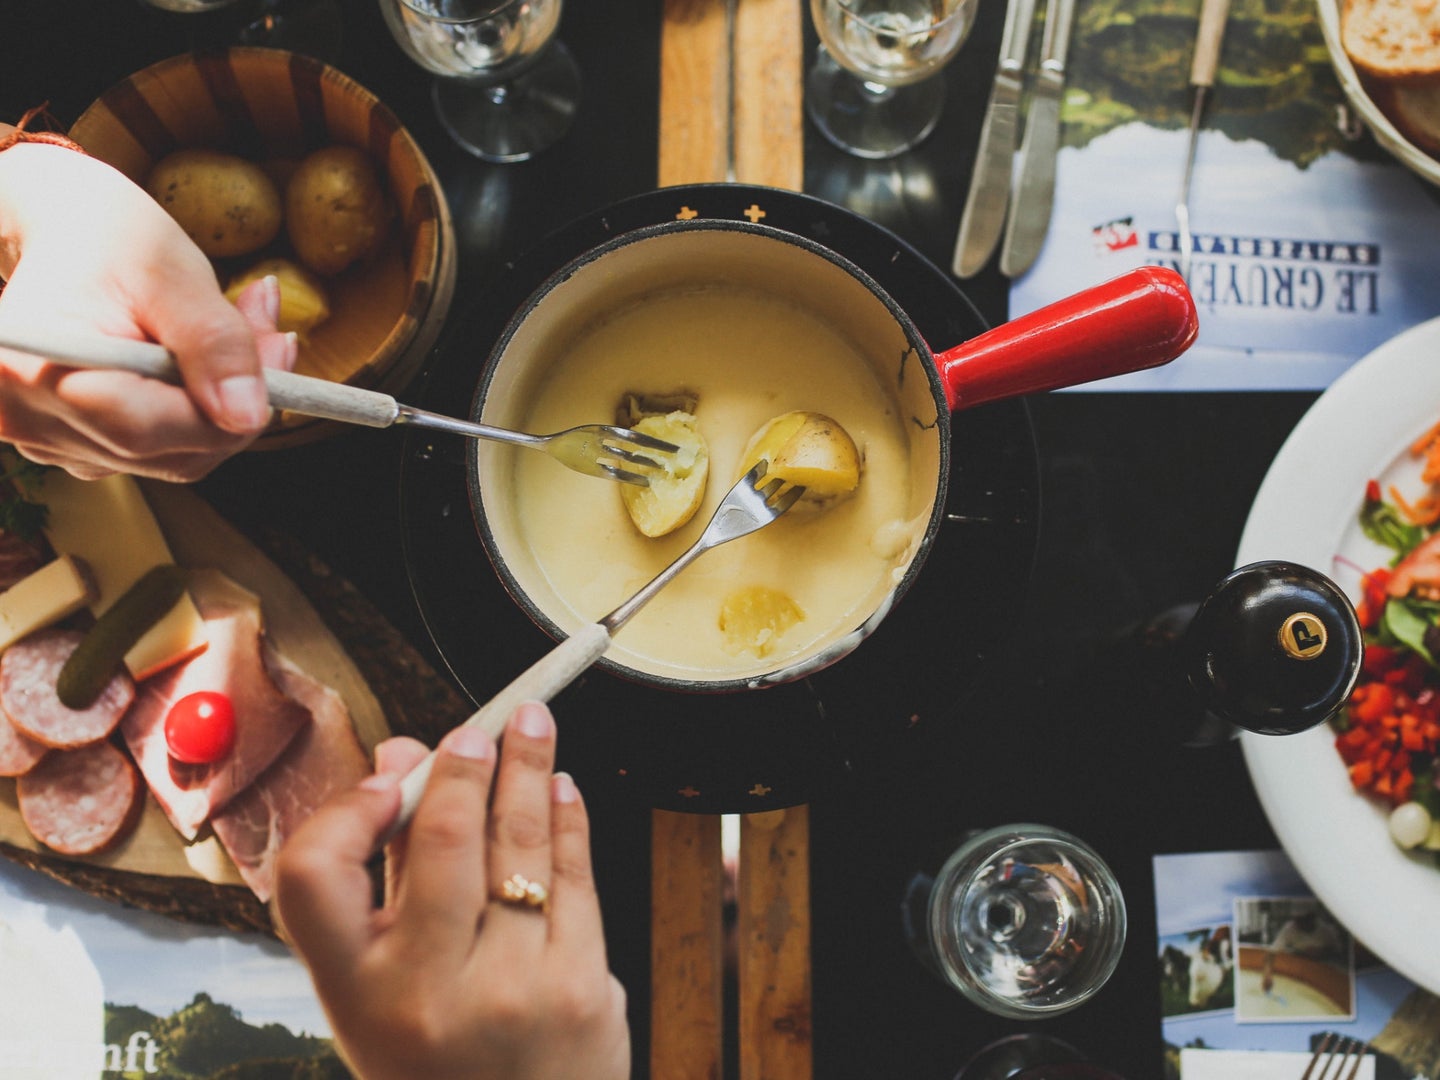 two people doing fondue with a bunch of food and using forks to dip potatoes in a pot of melted cheese